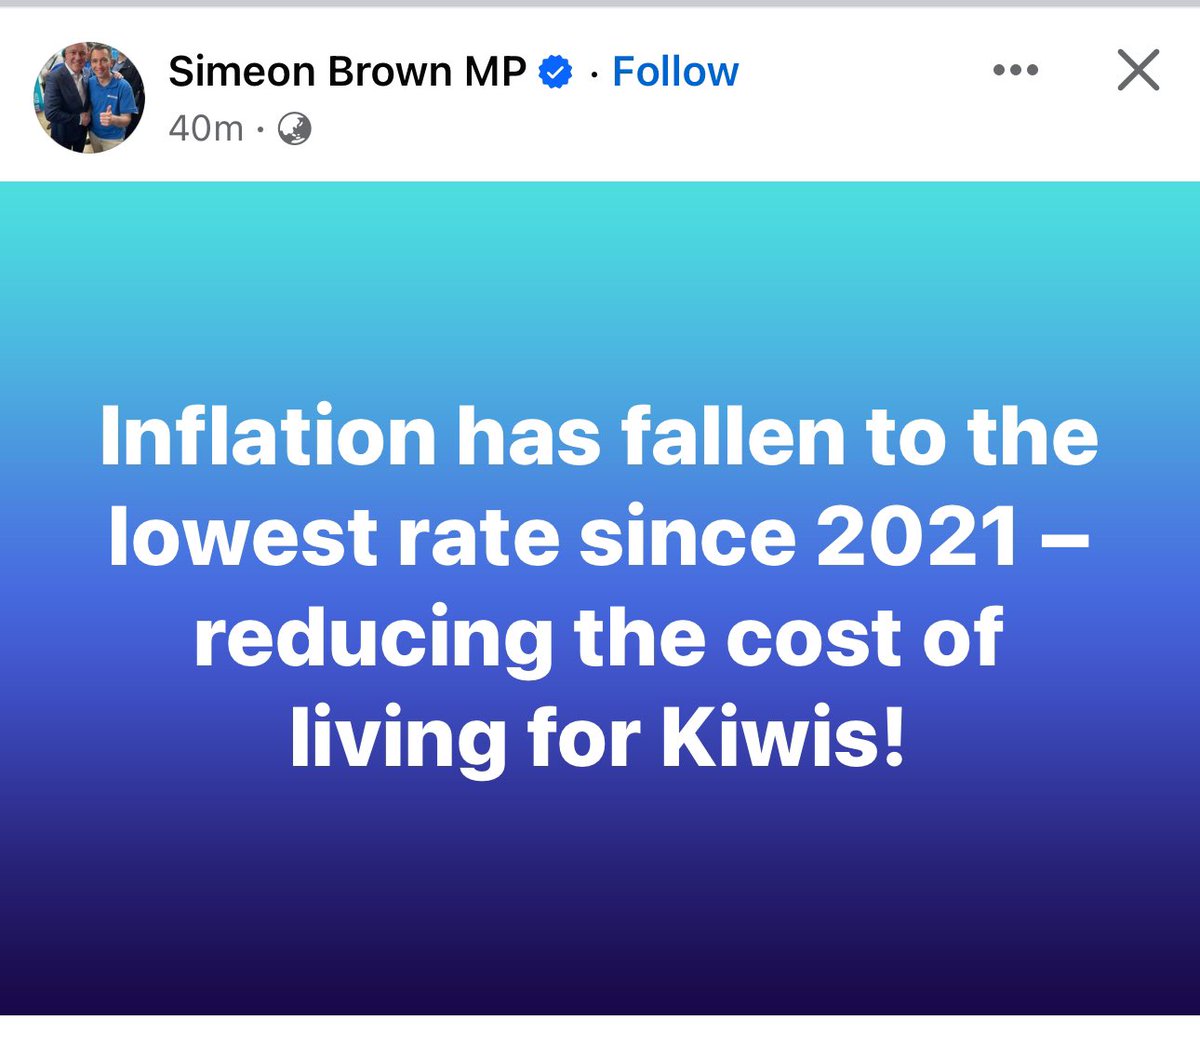 appearantly unclear to some: a lower rate of inflation is not a lower cost of living. Prices are still rising, just the pace of price rises has decreased And, this deceleration of inflation has been going on since 2022. When the intl inflation spike peaked.